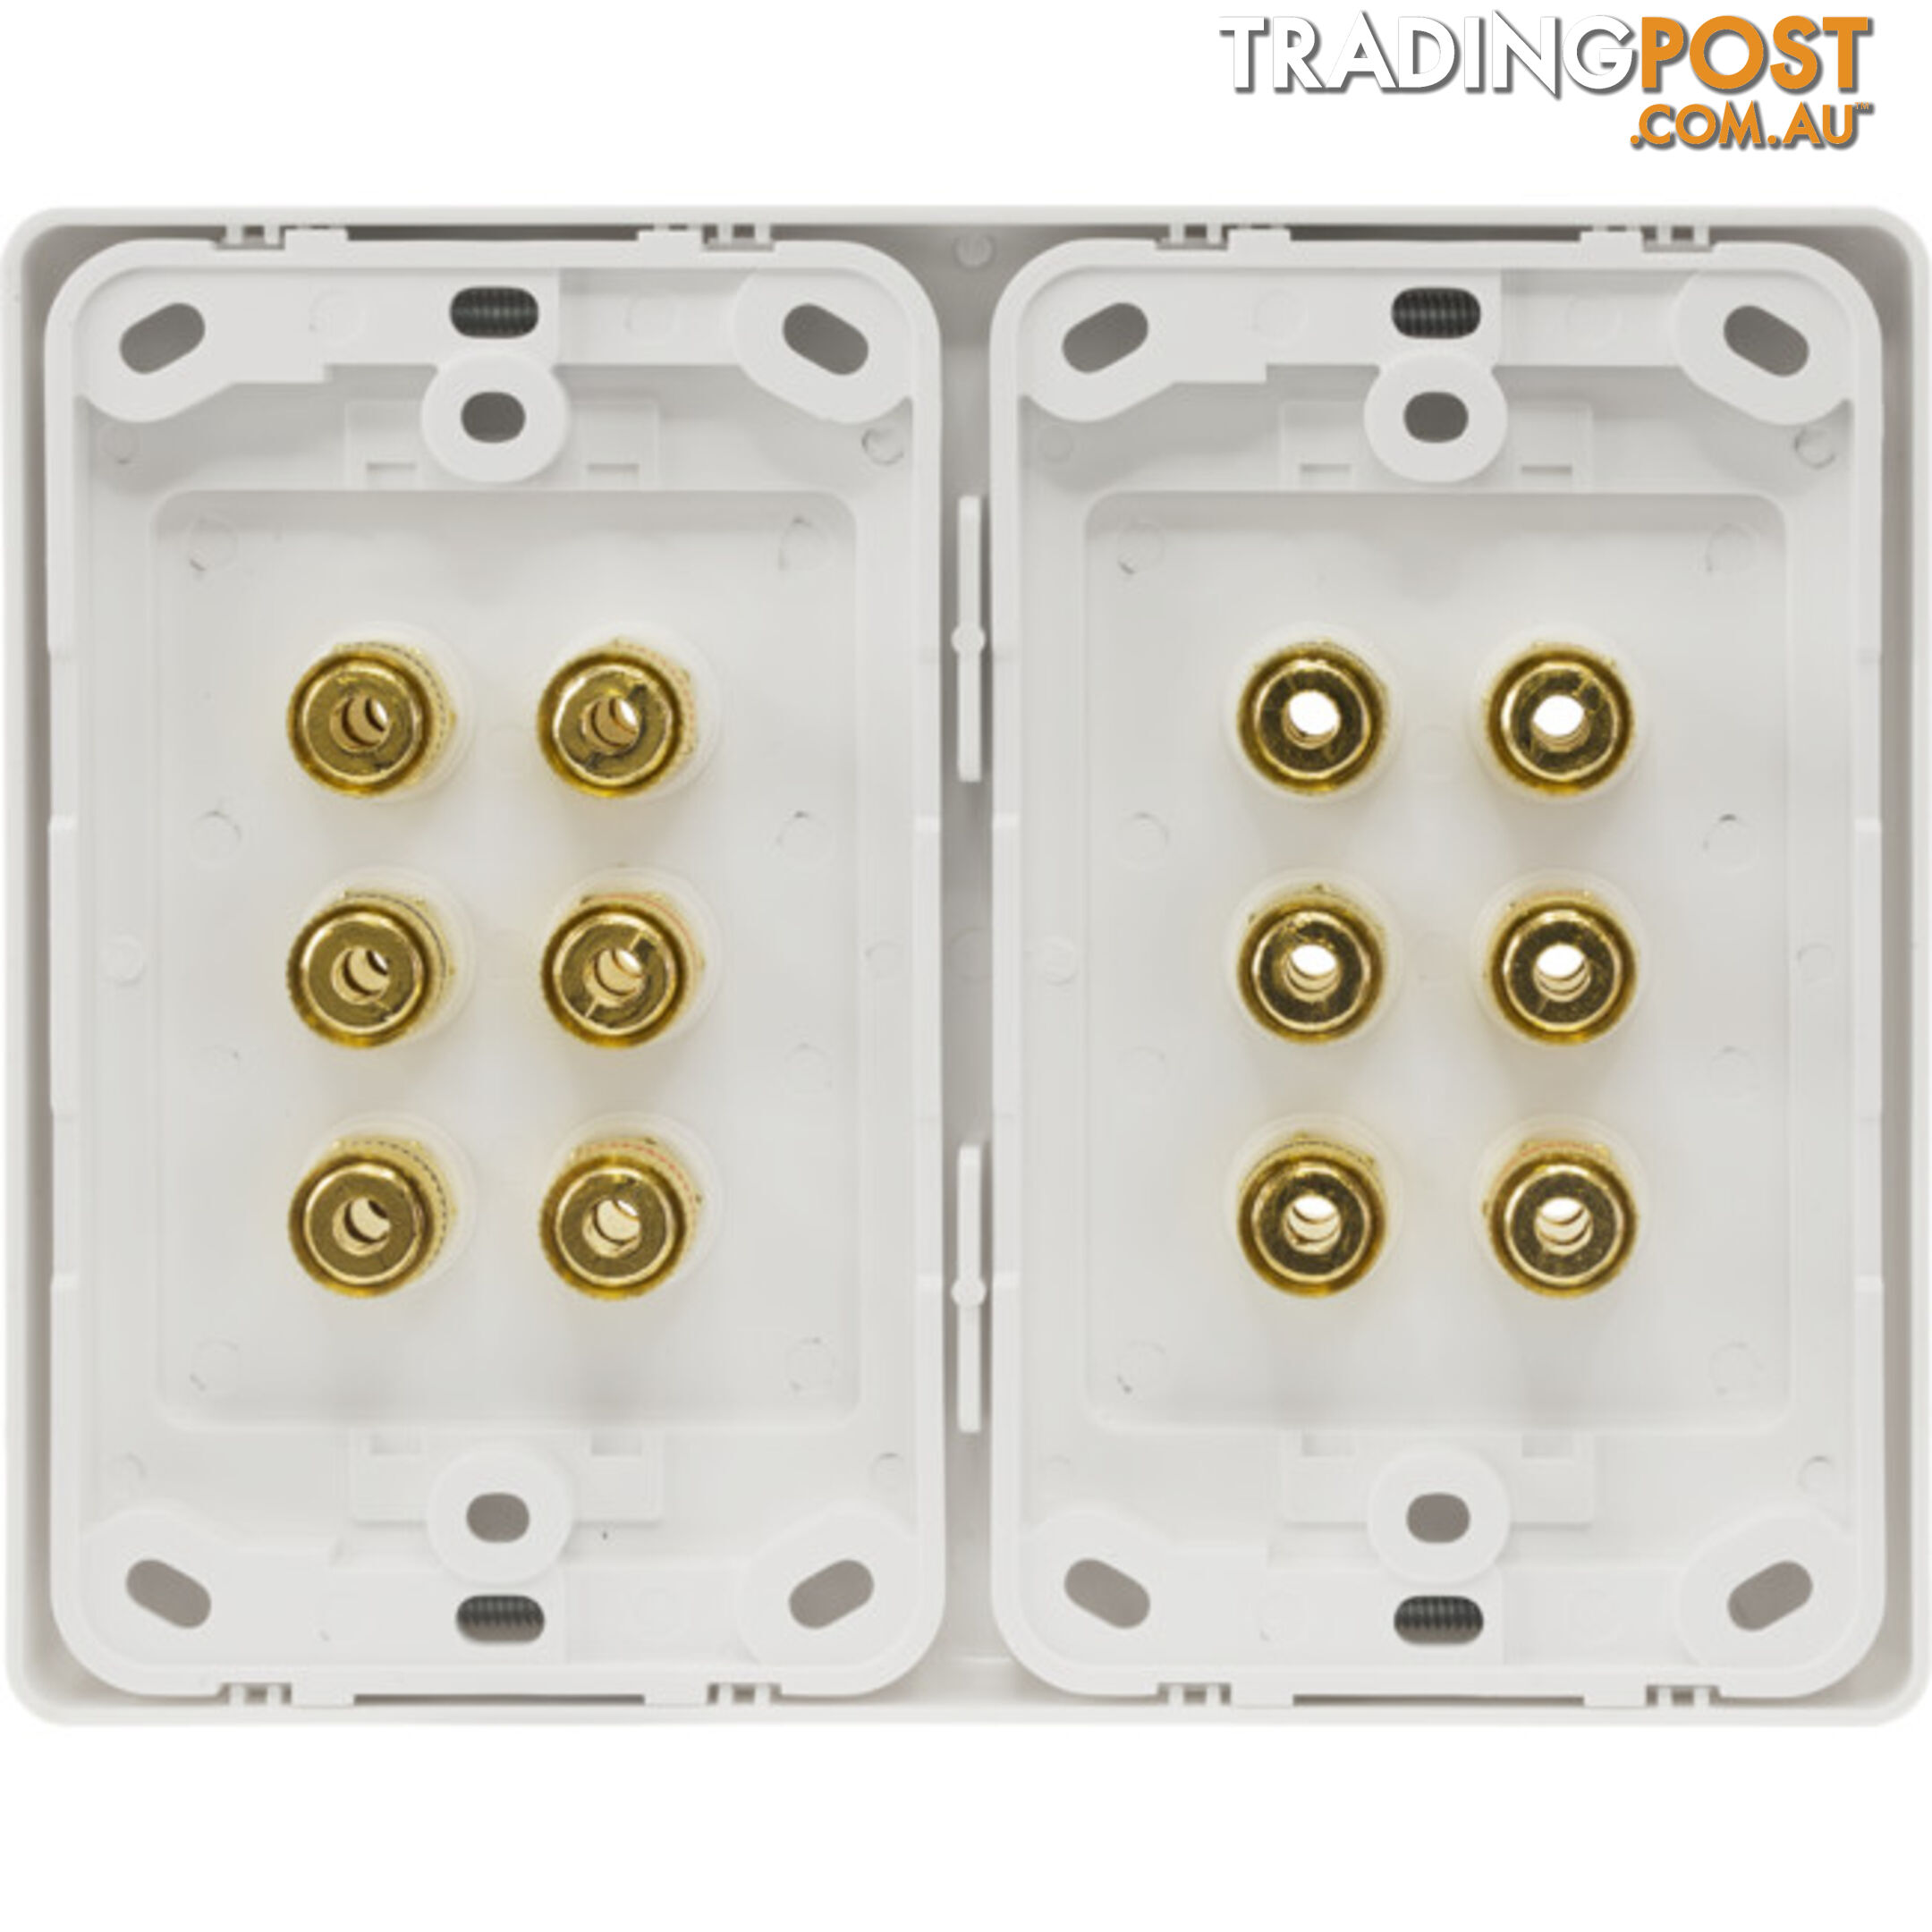 PRO1143 12 TERMINAL SPEAKER WALL PLATE GOLD PLATED 12X BANANA SOCKETS